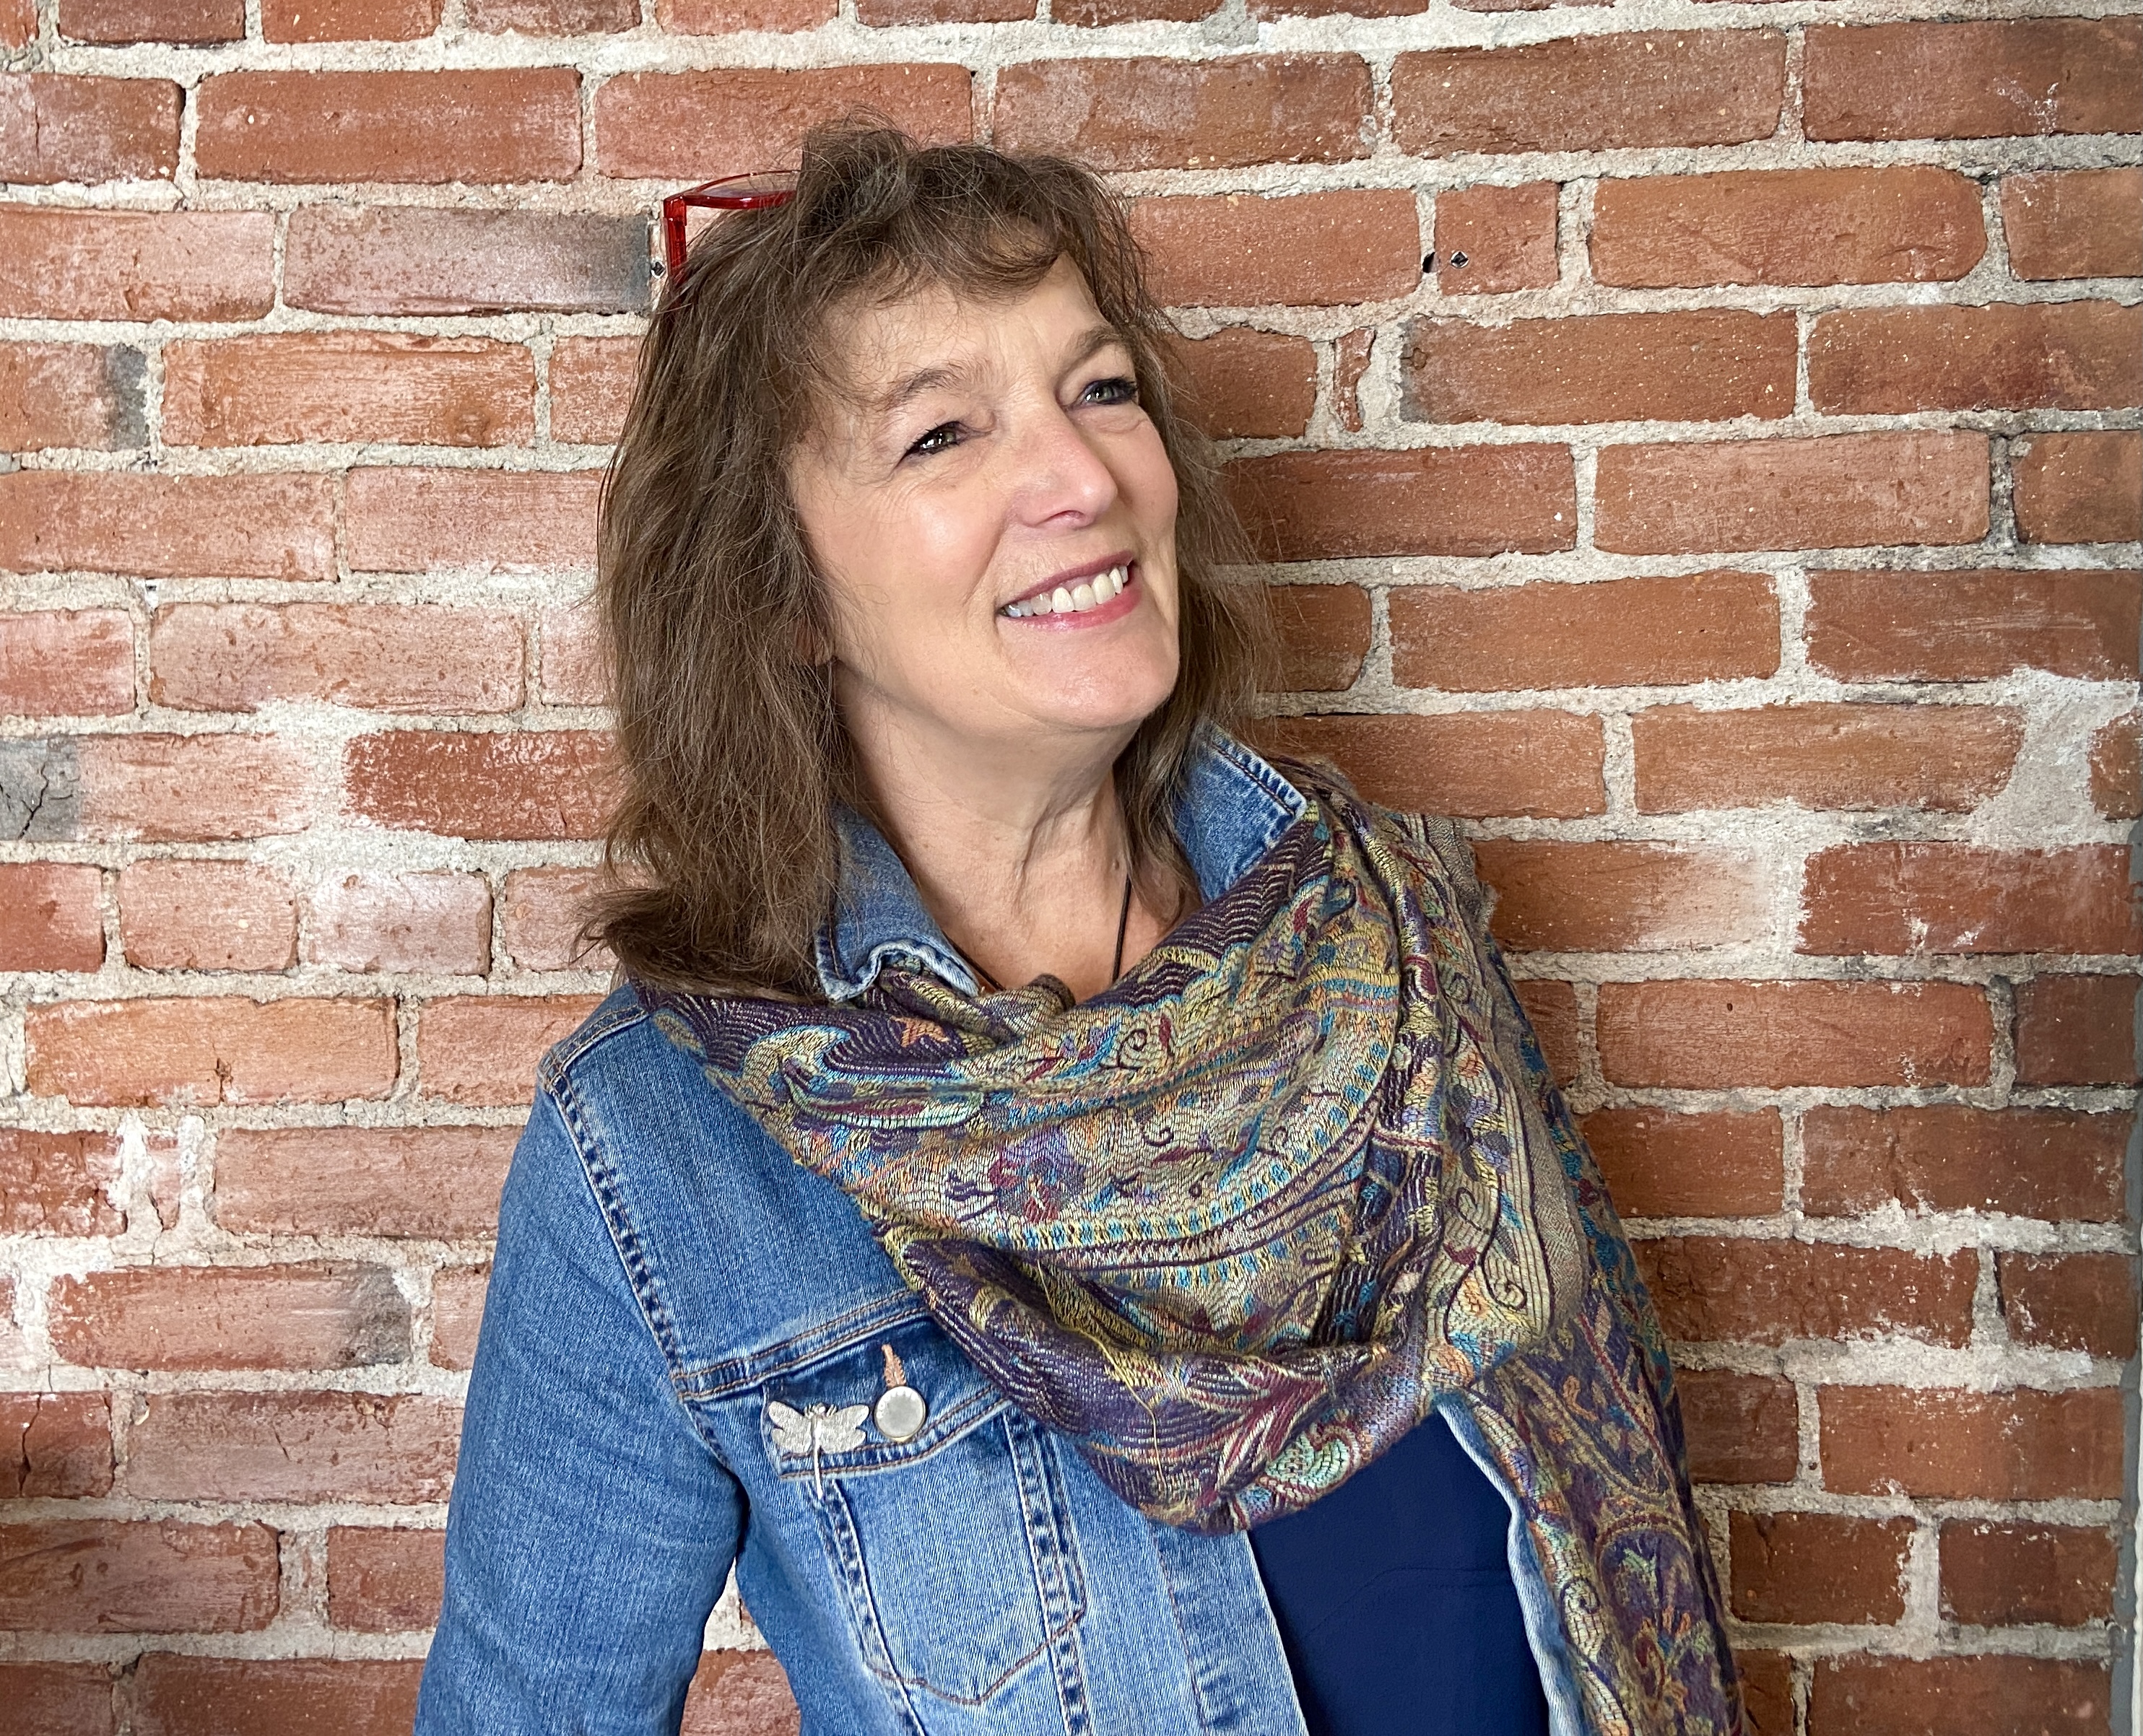 Portrait of Krys Holmes, wearing denim jacket and multicolored scarf, smiling and standing in front of brick wall.